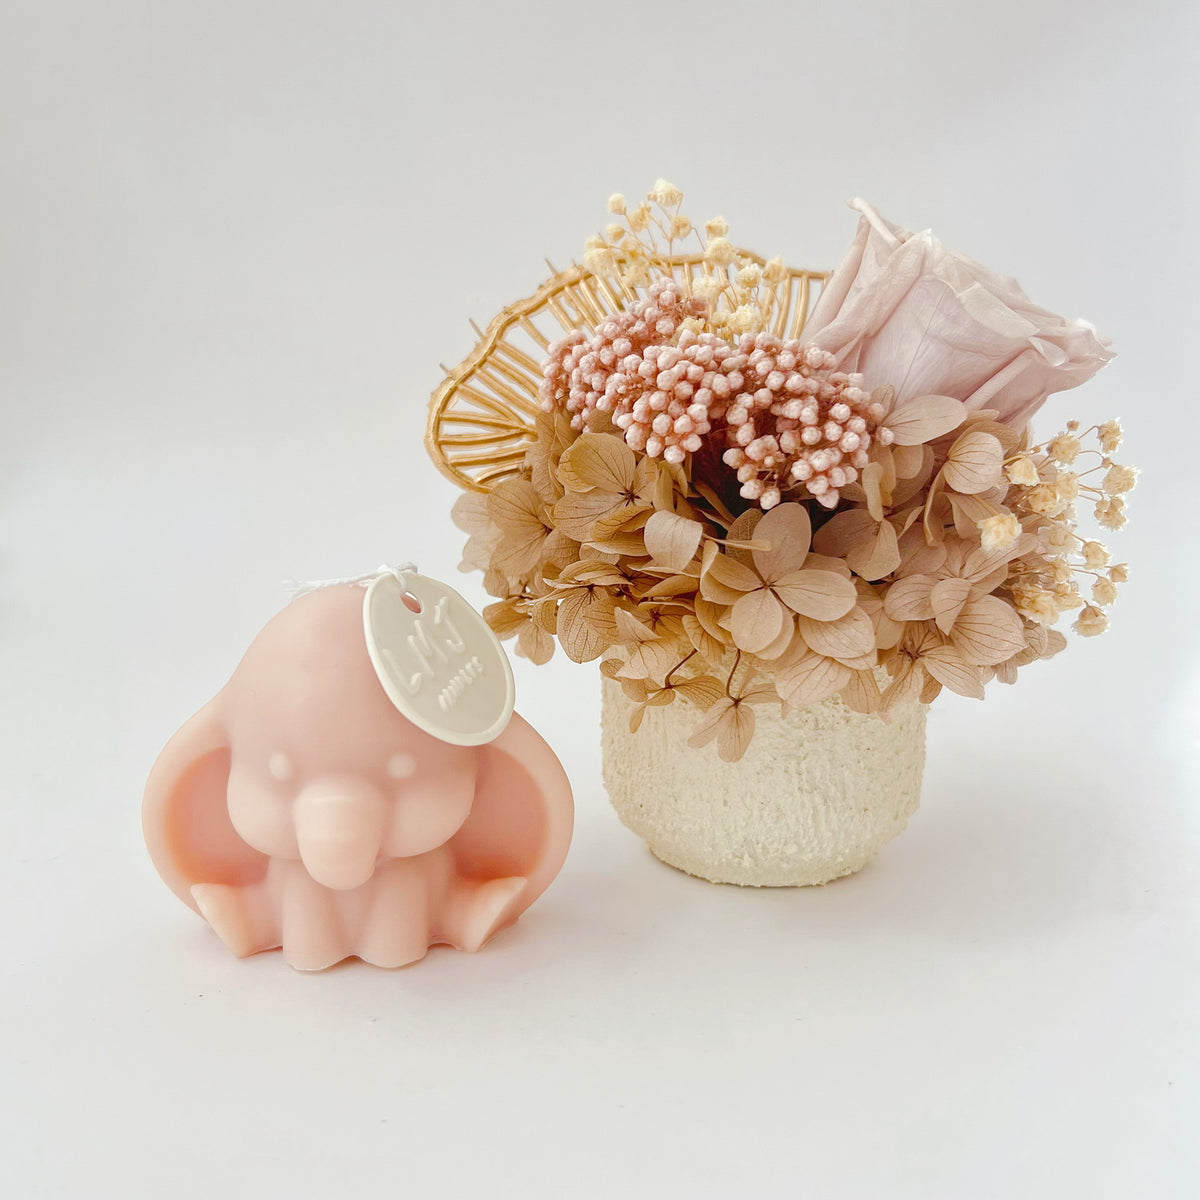 Small Elephant Candle - Newborn & Baby Shower Gift | LMJ Candles